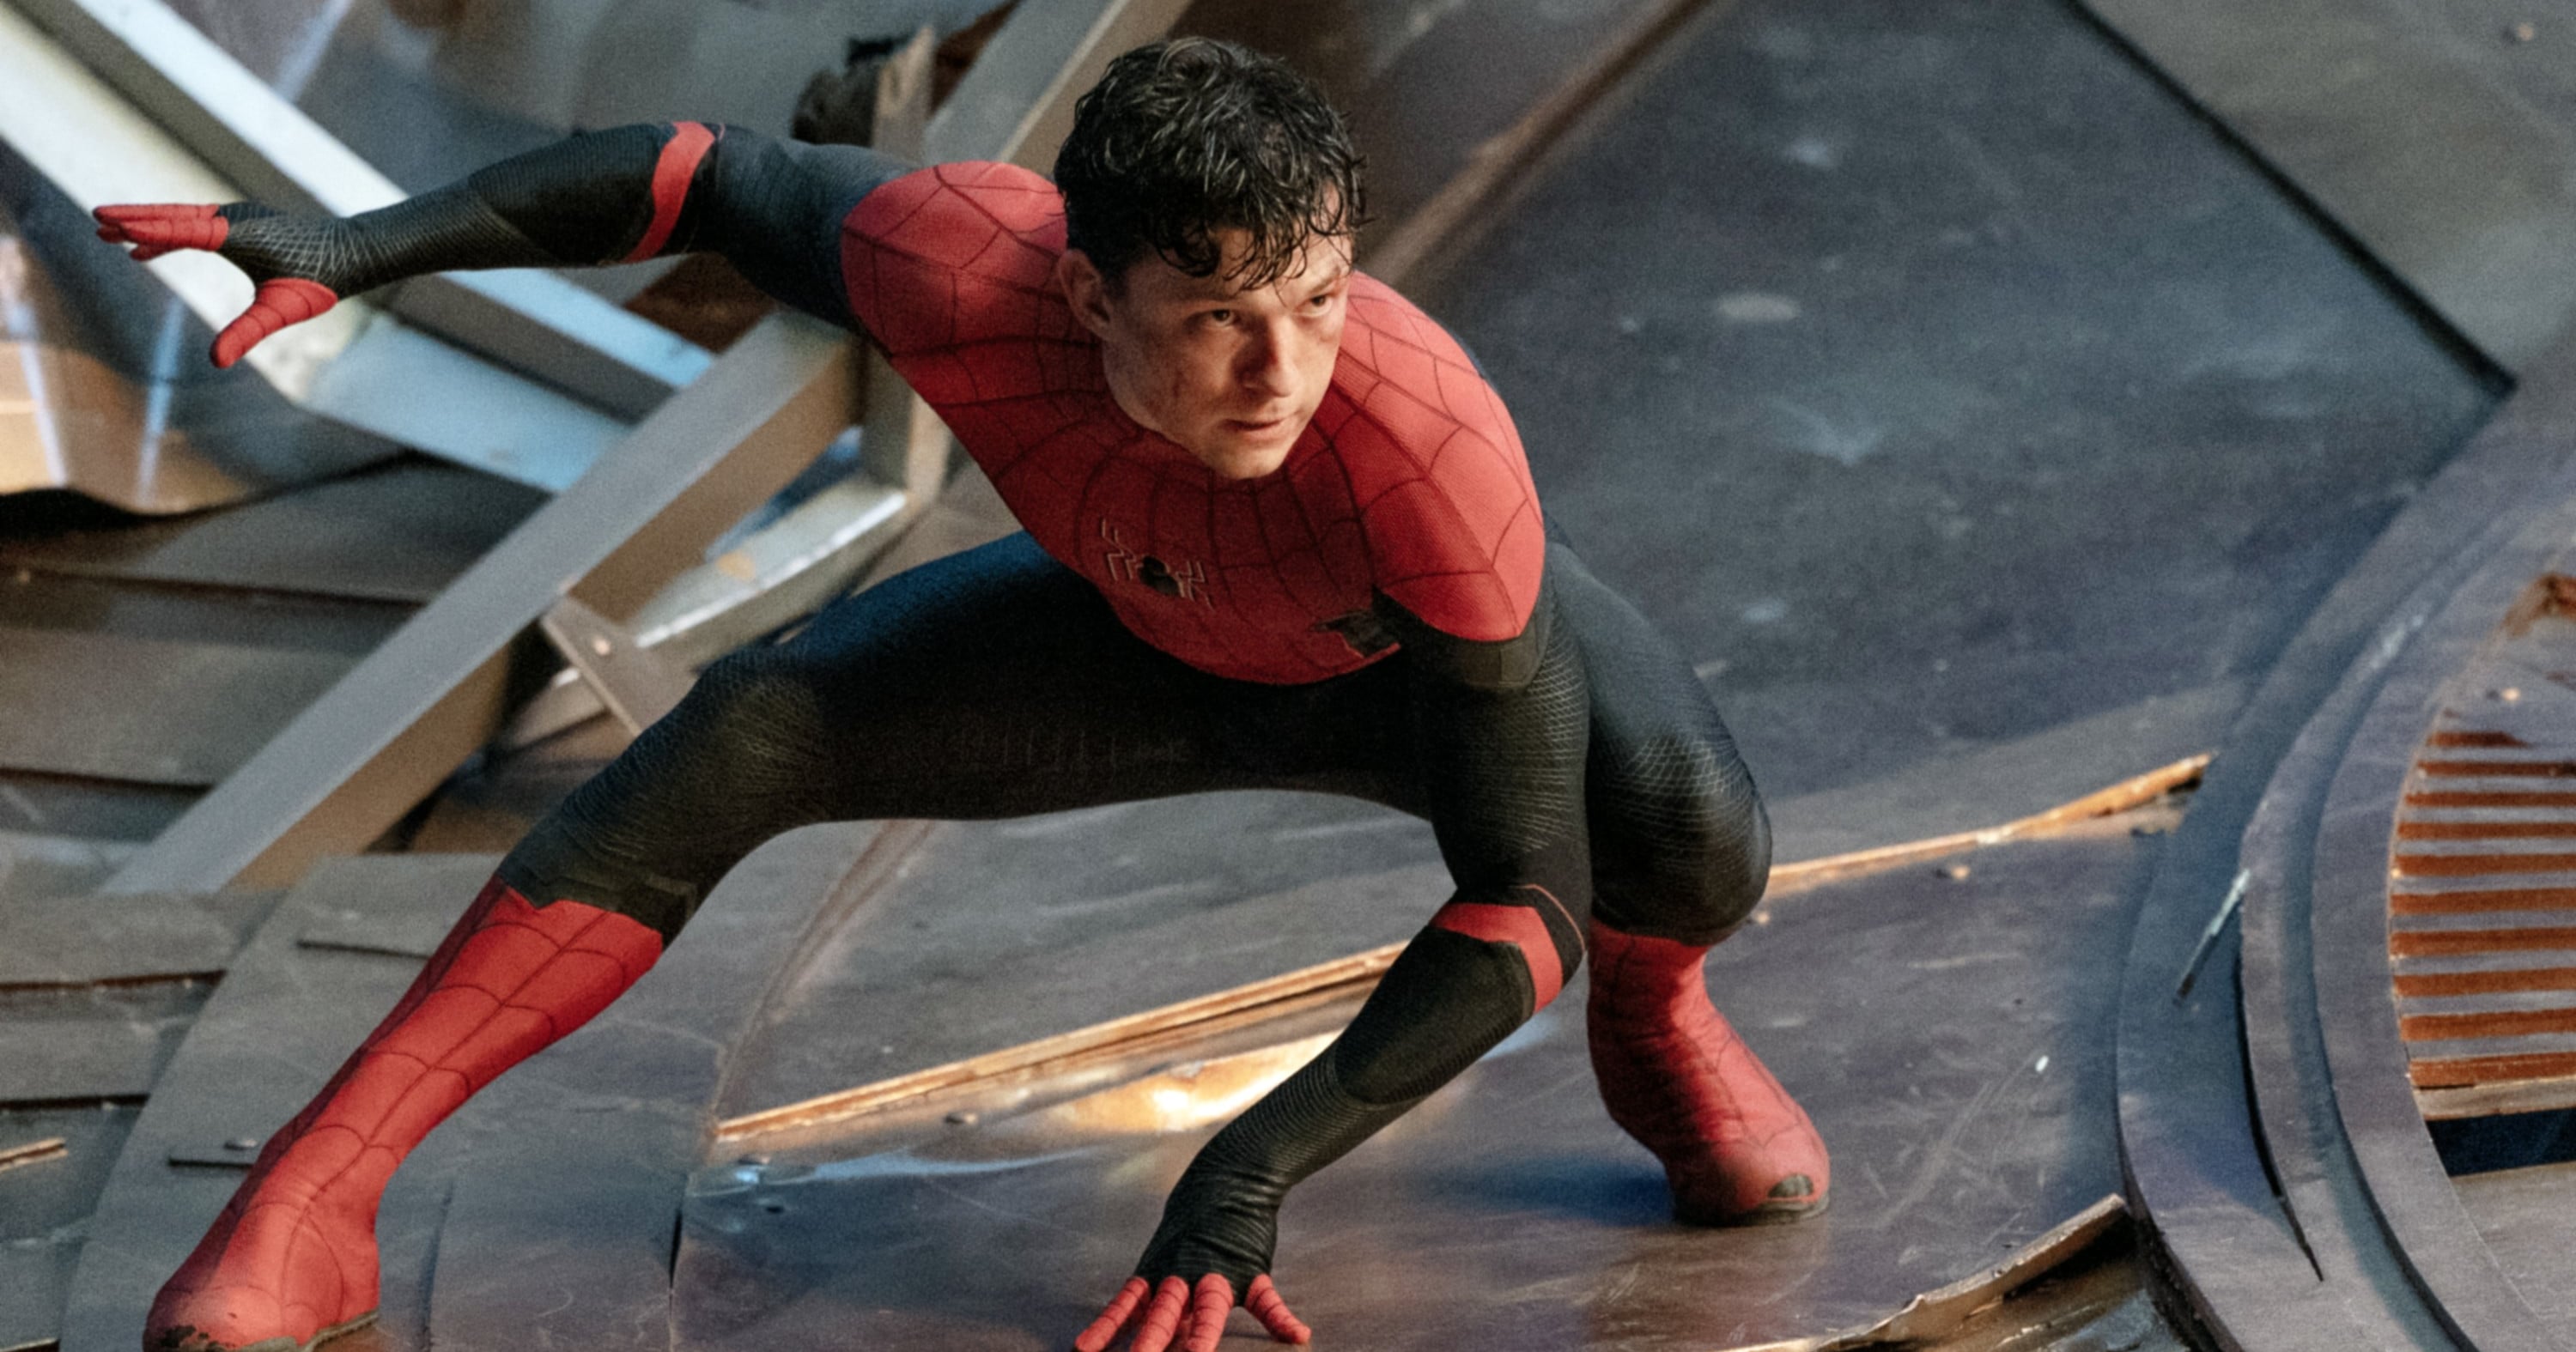 Spider-Man 4 will happen with Marvel, Tom Holland, says No Way